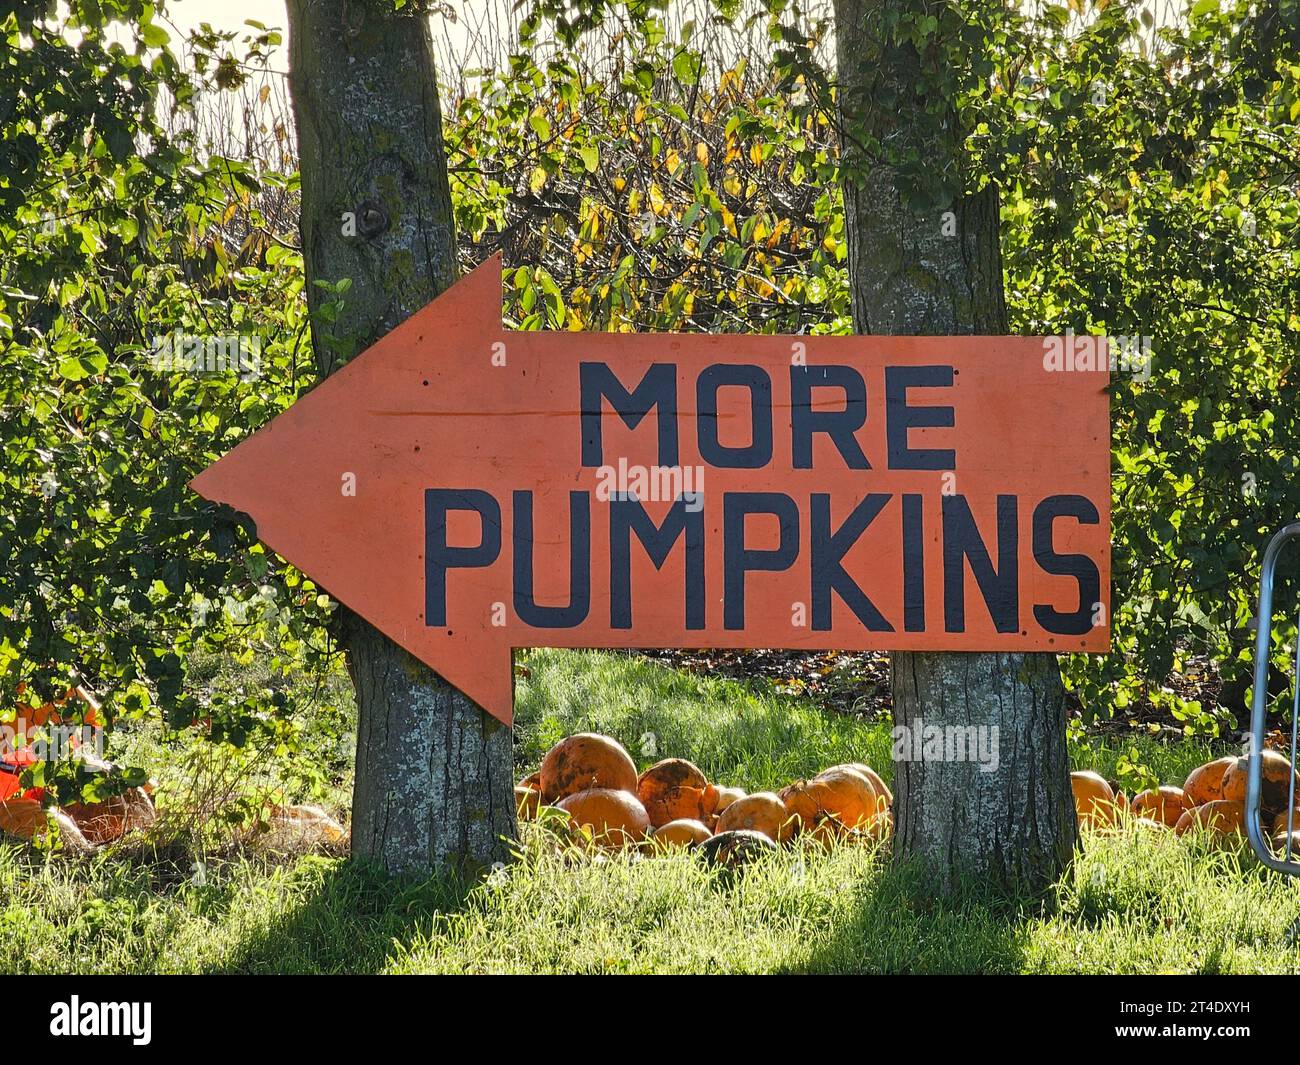 Directions to find more pumpkins at pick your own pumpkin event Stock Photo